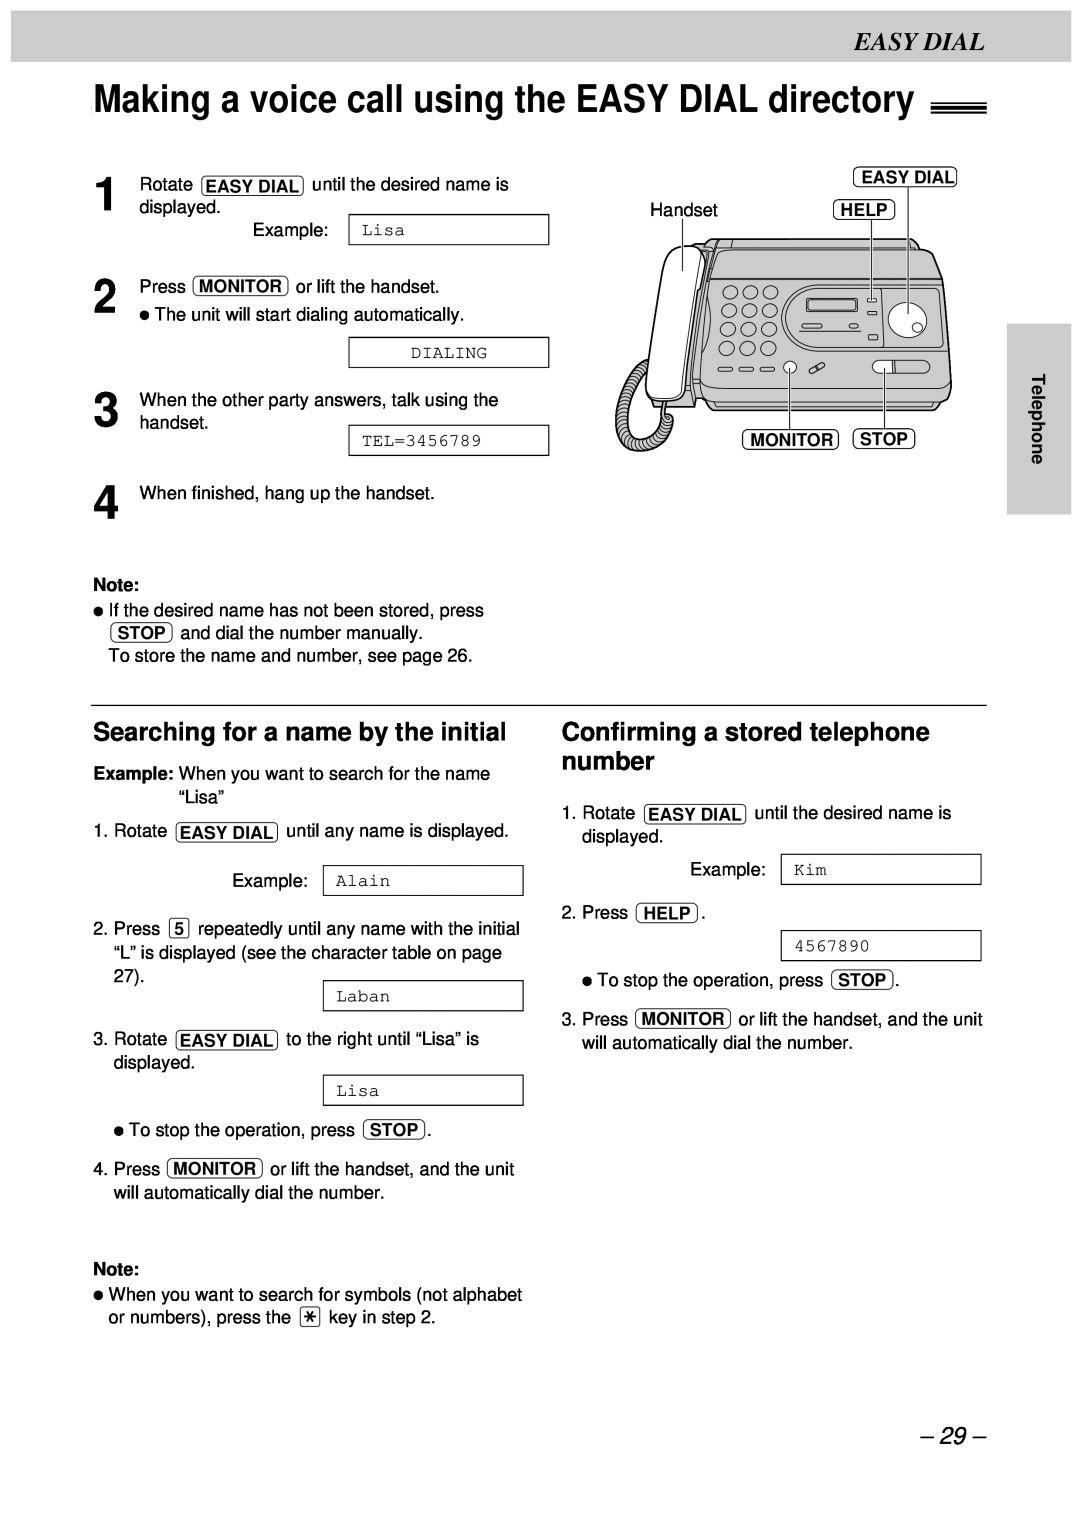 Panasonic KX-FT34HK Making a voice call using the EASY DIAL directory, Searching for a name by the initial, Easy Dial 